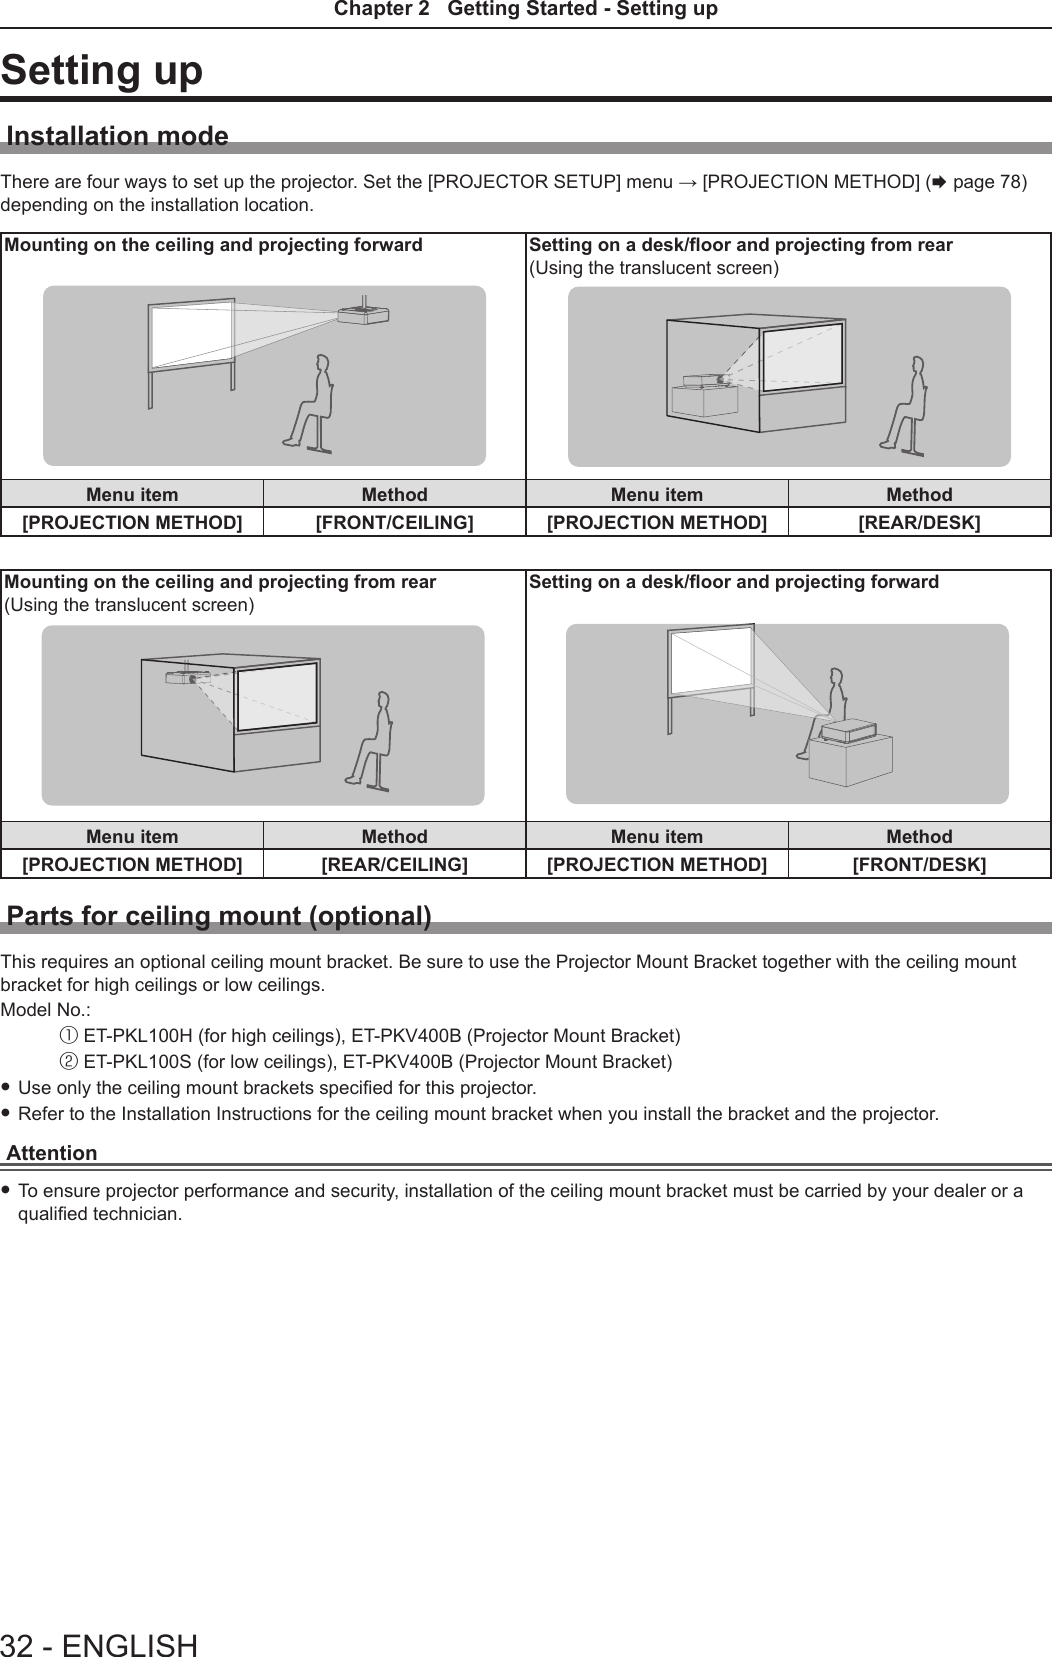 Setting upInstallation modeThere are four ways to set up the projector. Set the [PROJECTOR SETUP] menu → [PROJECTION METHOD] (x page 78) depending on the installation location. Mounting on the ceiling and projecting forward Setting on a desk/oor and projecting from rear(Using the translucent screen)Menu item Method Menu item Method[PROJECTION METHOD] [FRONT/CEILING] [PROJECTION METHOD] [REAR/DESK]Mounting on the ceiling and projecting from rear(Using the translucent screen)Setting on a desk/oor and projecting forwardMenu item Method Menu item Method[PROJECTION METHOD] [REAR/CEILING] [PROJECTION METHOD] [FRONT/DESK]Parts for ceiling mount (optional)This requires an optional ceiling mount bracket. Be sure to use the Projector Mount Bracket together with the ceiling mount bracket for high ceilings or low ceilings.Model No.: ① ET-PKL100H (for high ceilings), ET-PKV400B (Projector Mount Bracket) ② ET-PKL100S (for low ceilings), ET-PKV400B (Projector Mount Bracket)  fUse only the ceiling mount brackets specied for this projector. fRefer to the Installation Instructions for the ceiling mount bracket when you install the bracket and the projector.Attention fTo ensure projector performance and security, installation of the ceiling mount bracket must be carried by your dealer or a qualied technician.32 - ENGLISHChapter 2   Getting Started - Setting up